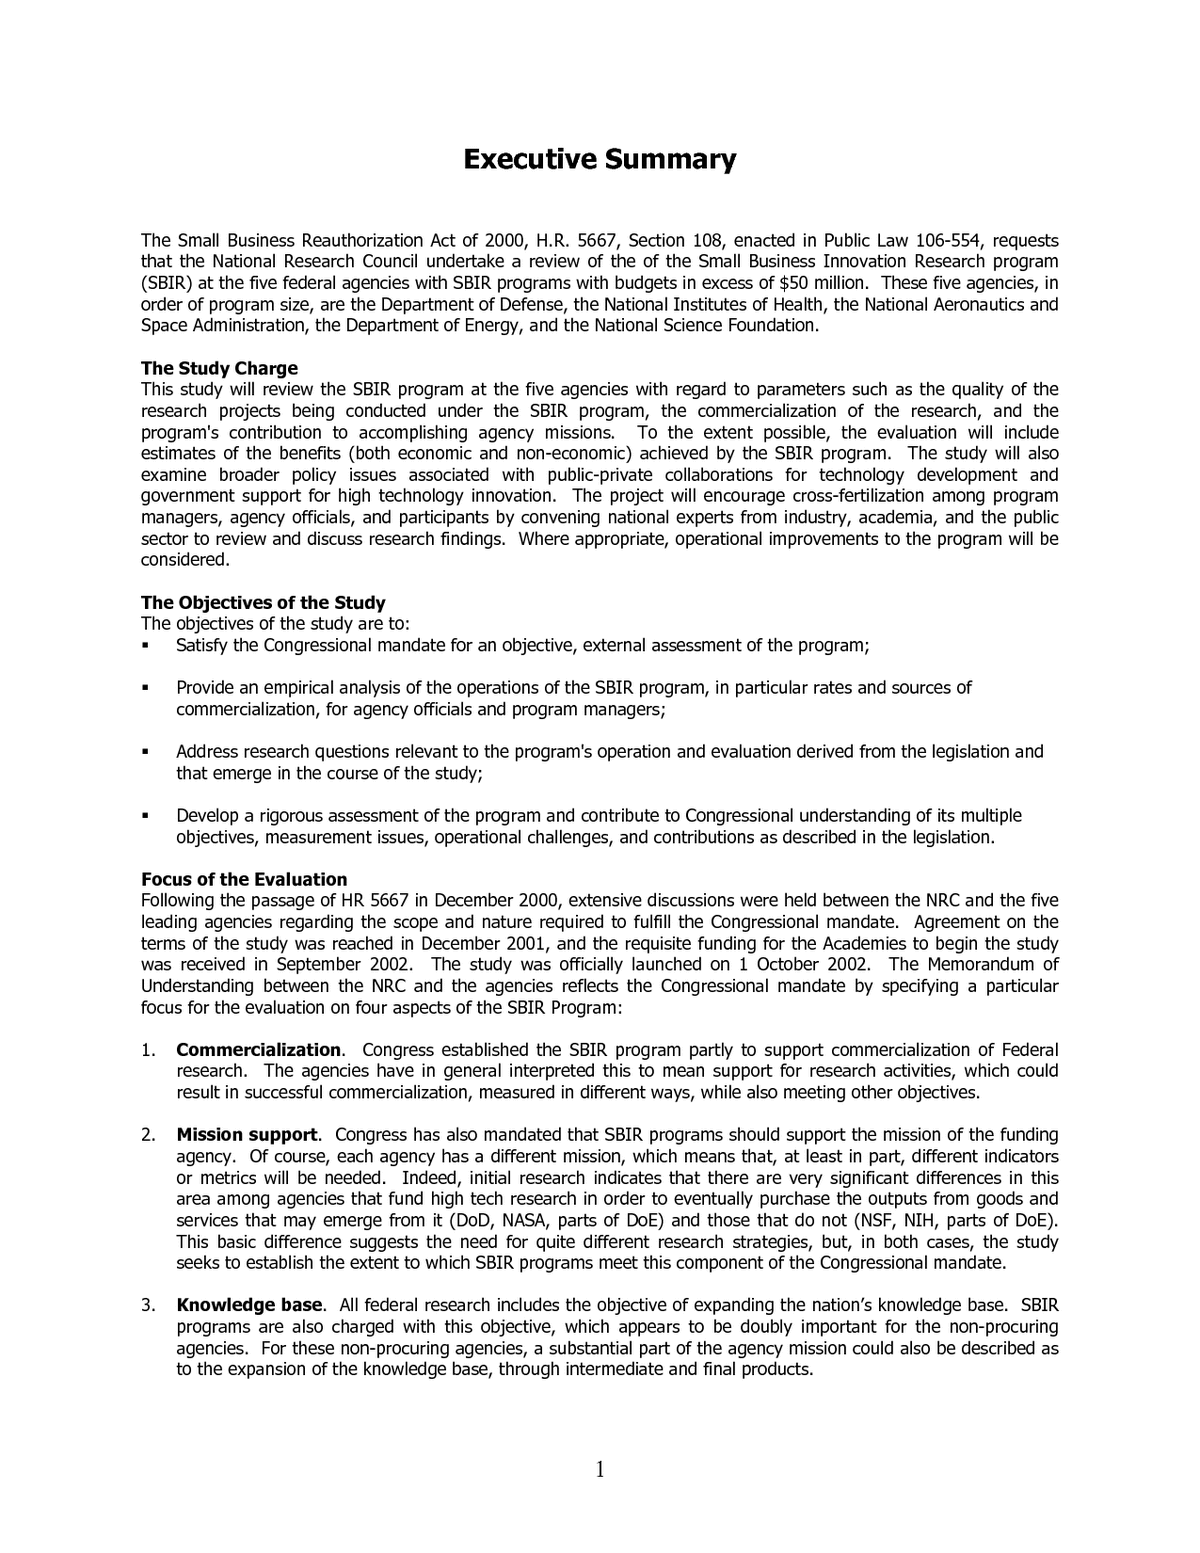 Executive Summary Template For A Project from images.nap.edu